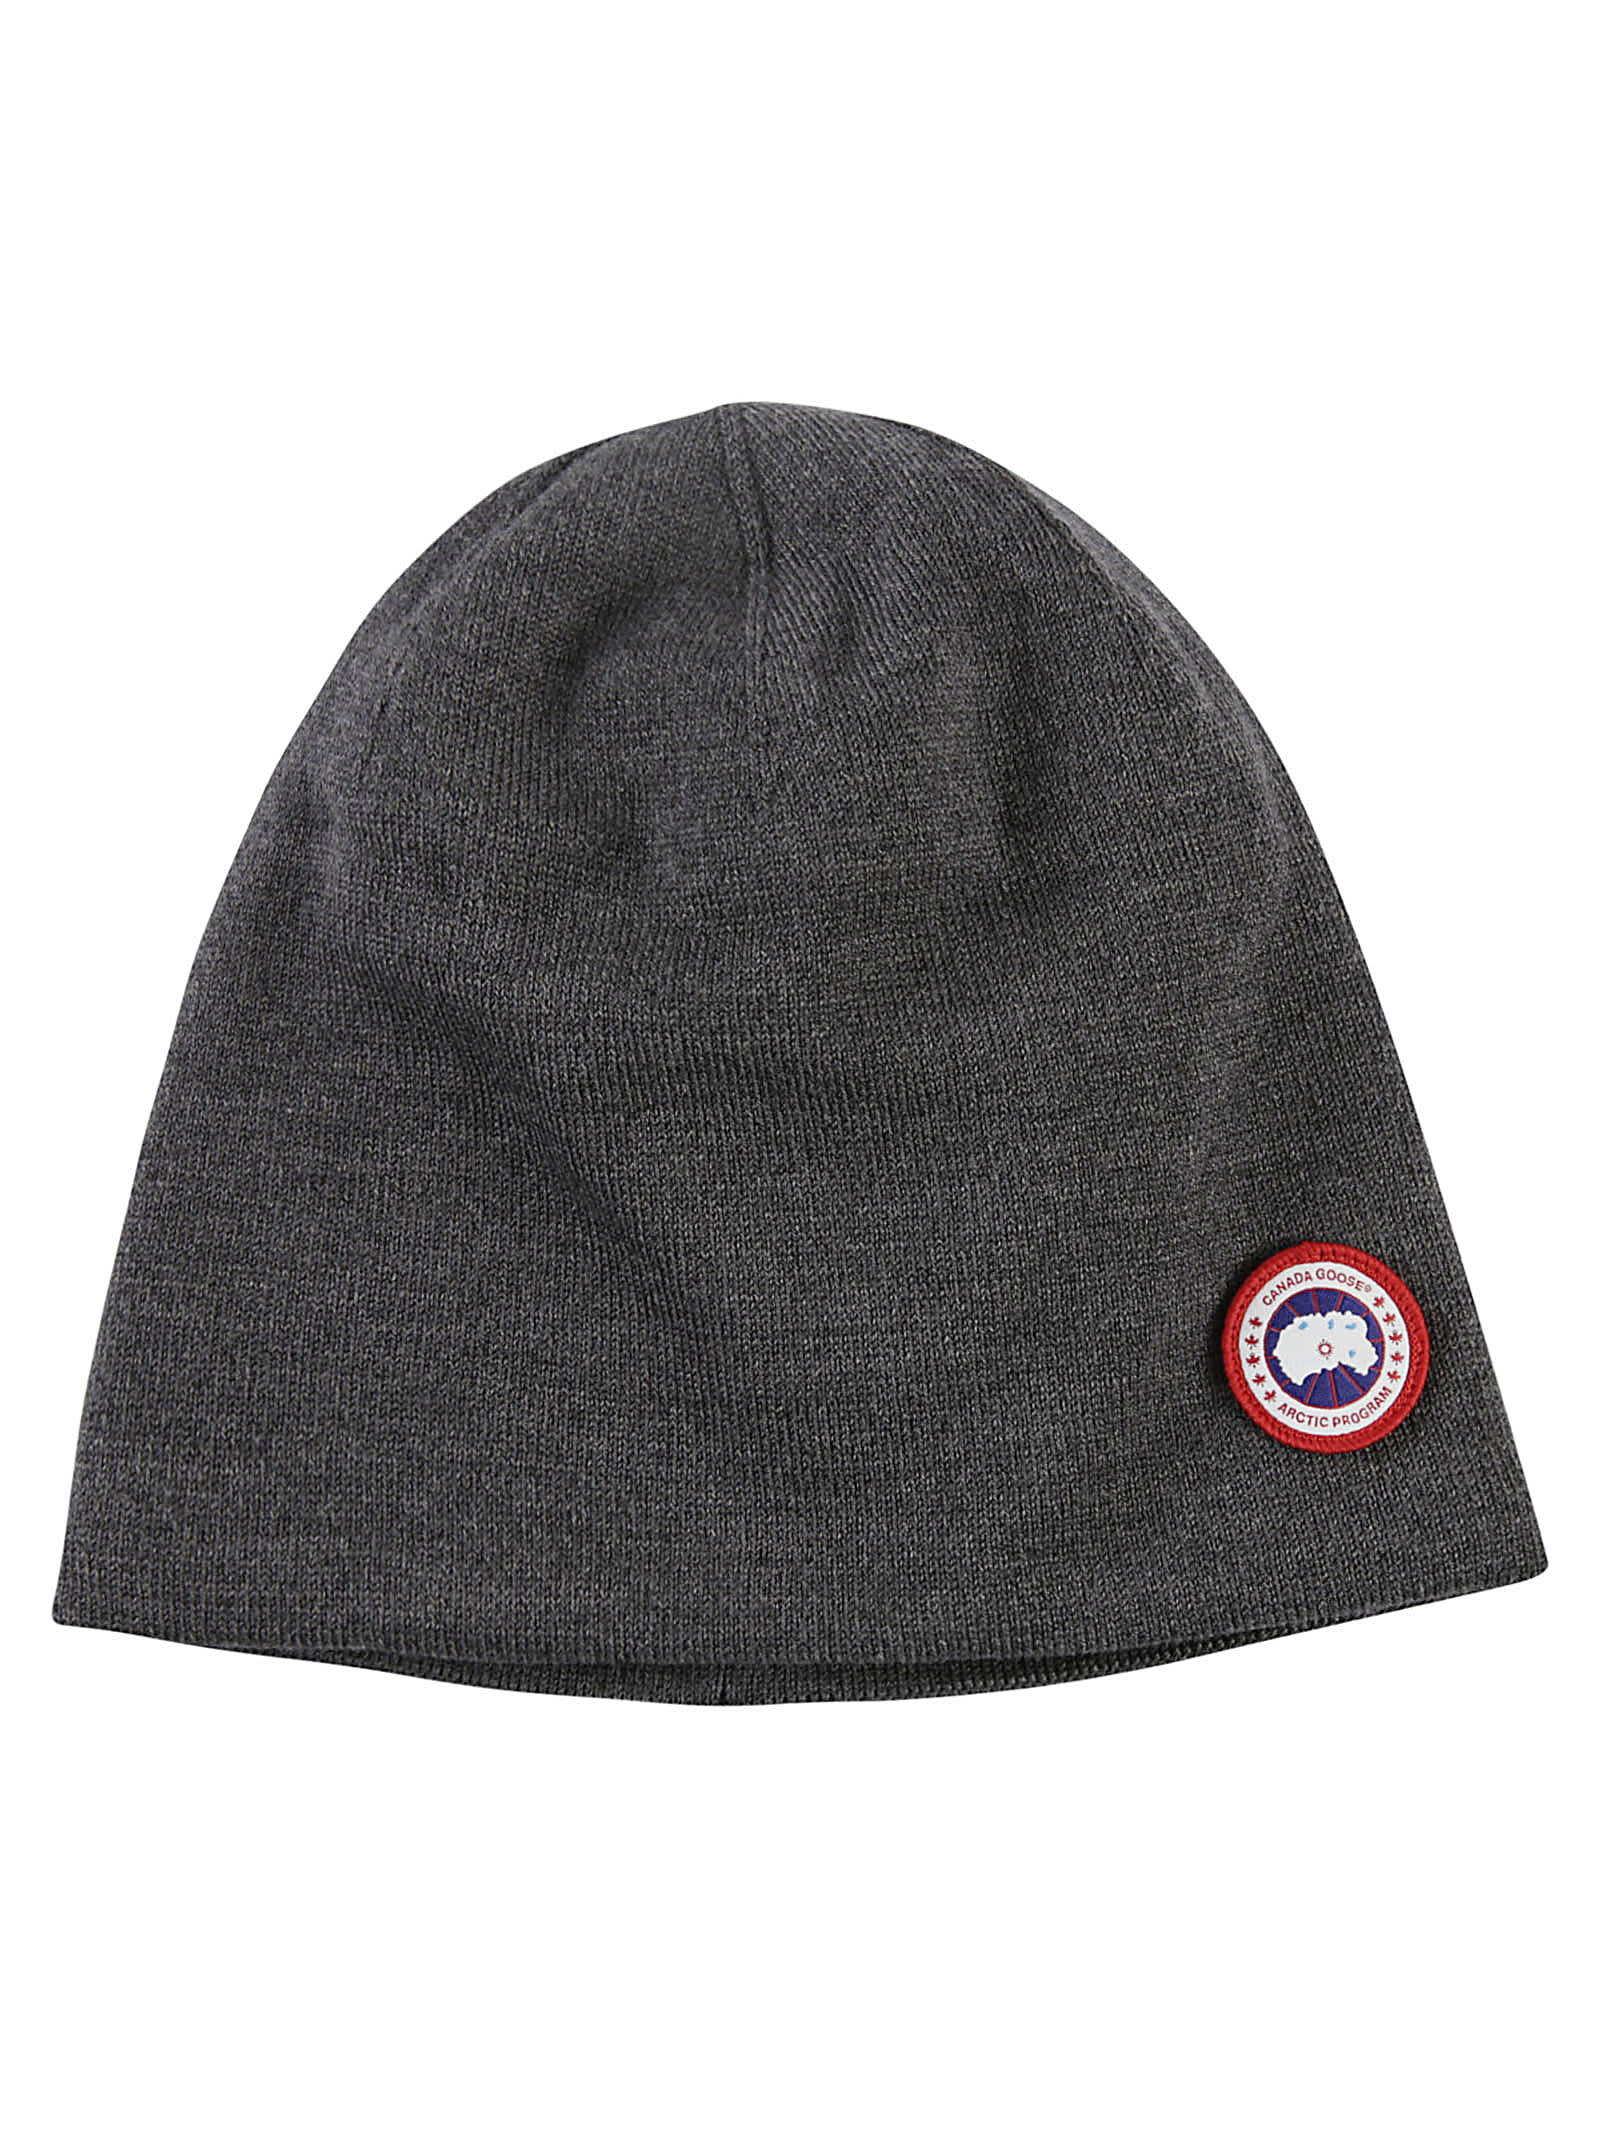 Canada Goose Logo Patched Beanie